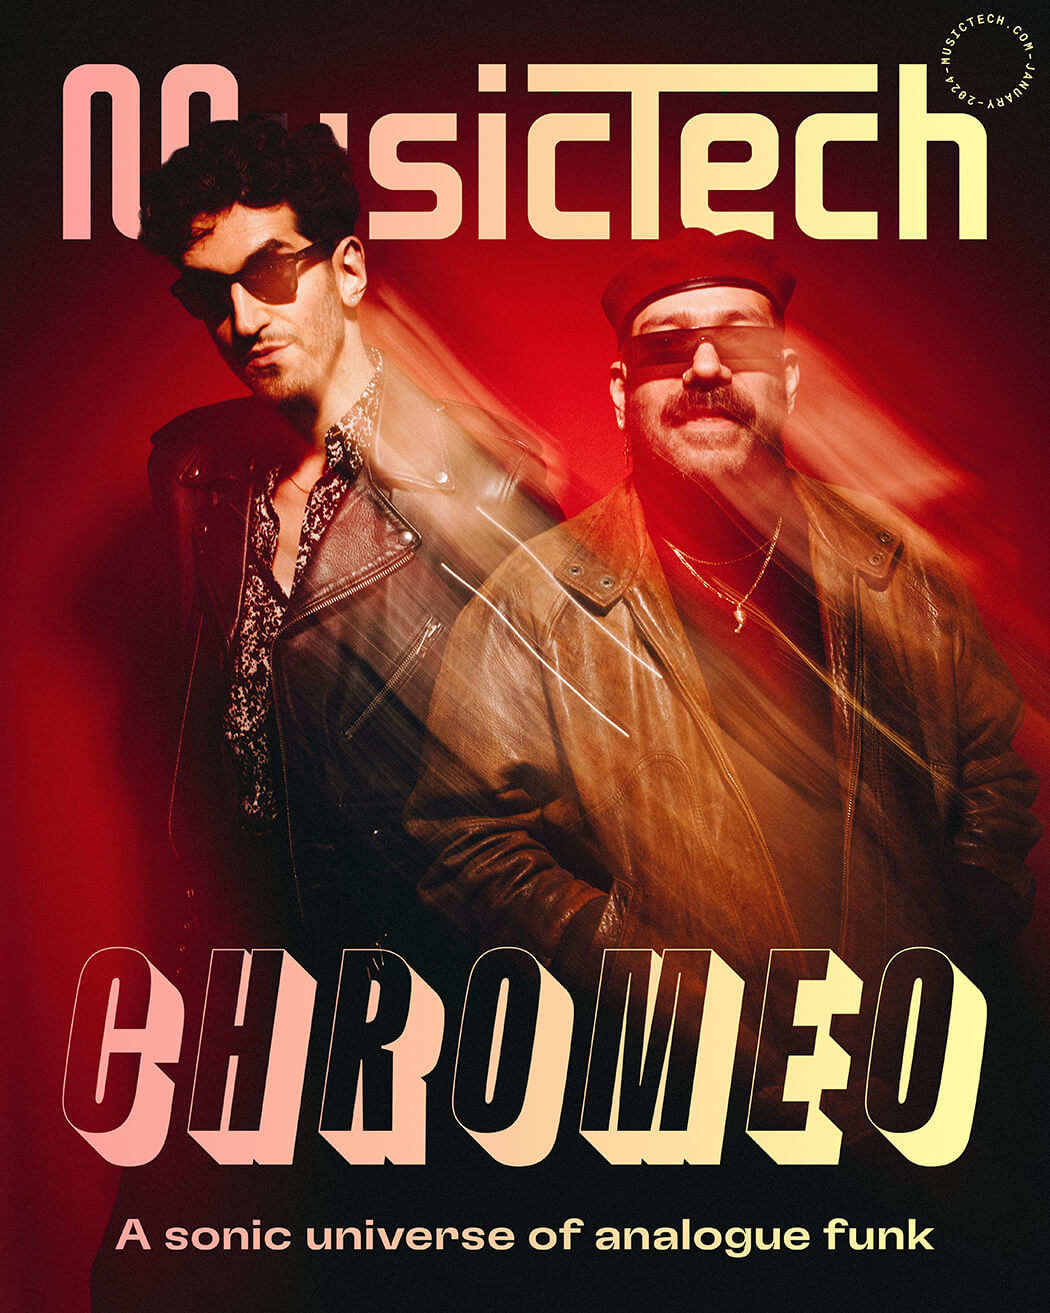 Chromeo on The Cover of MusicTech, photo by Fiona Garden